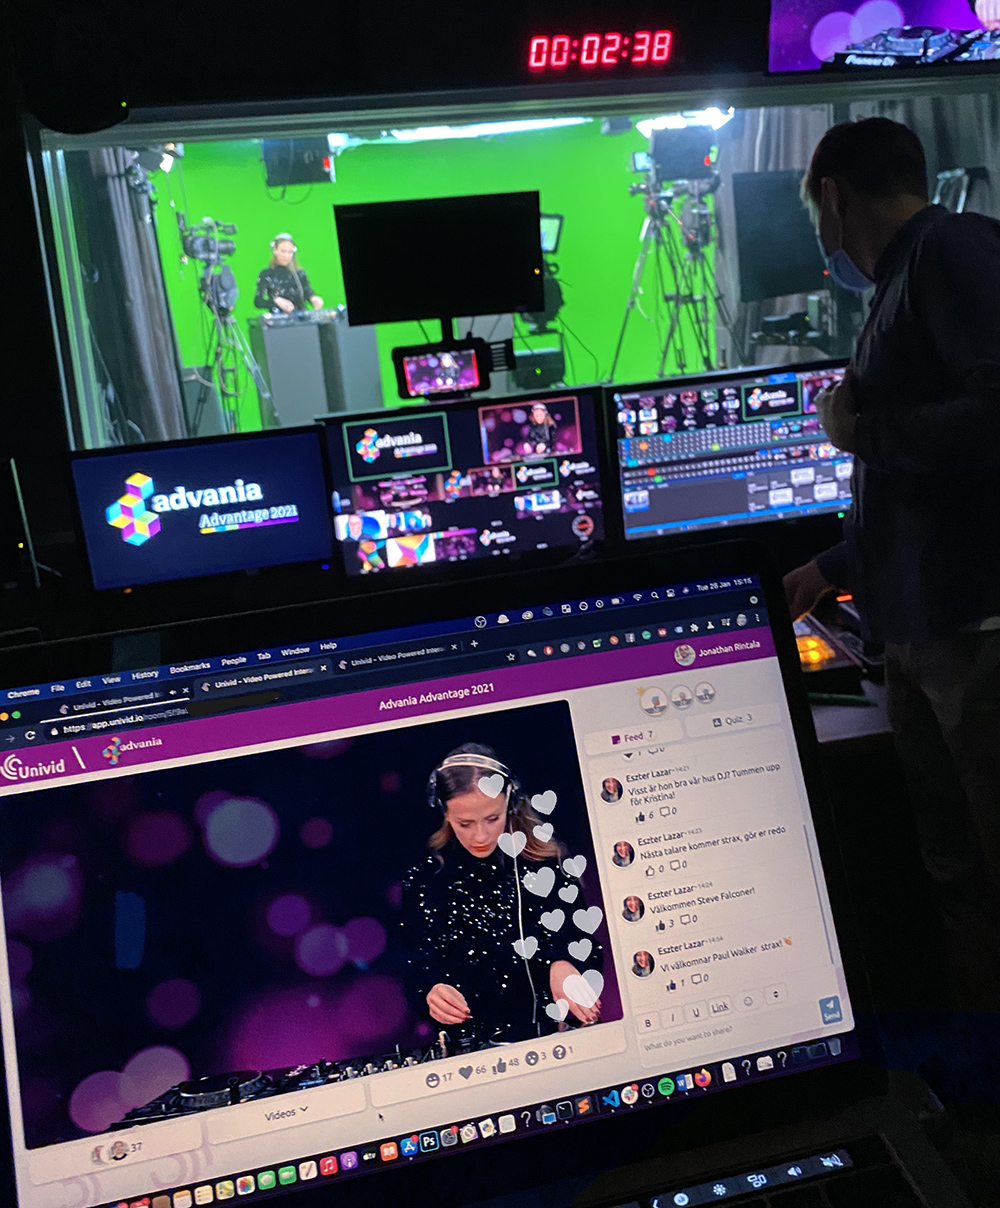 The yearly Advantage digital studio event with Advania was hosted on Univid - with chat, digital quiz, and emojis. Fantastic live music with DJ Kristina in the Twenty Studios green screen studio.